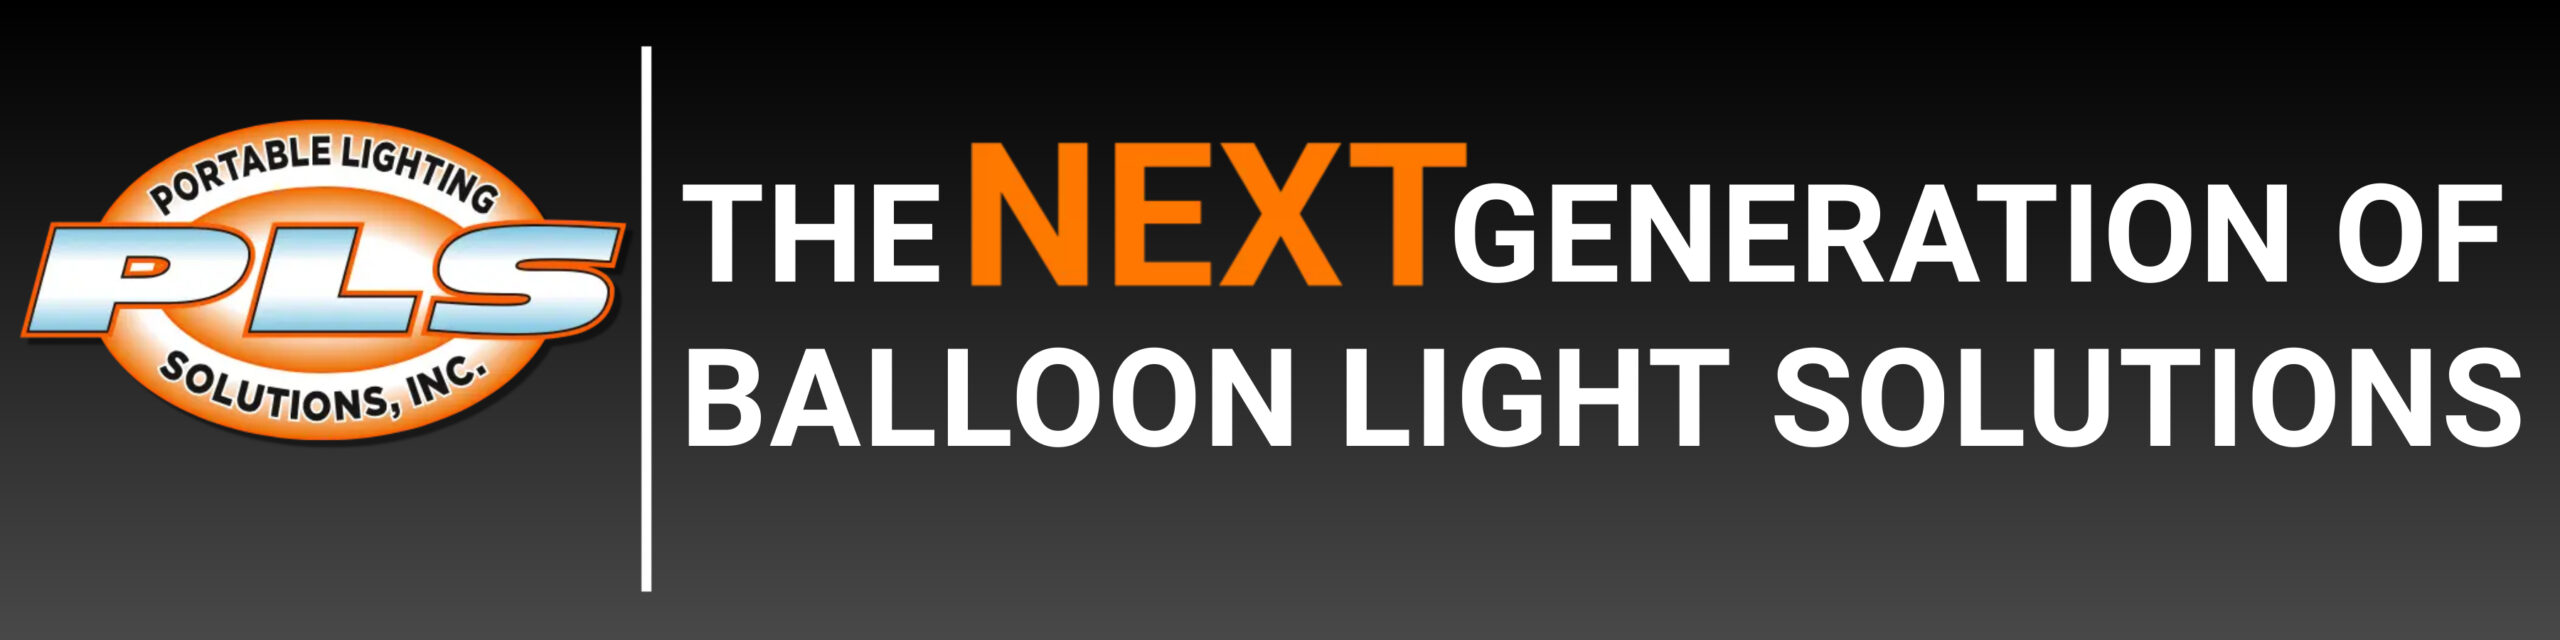 the next generation balloon lighting solutions_usa made_portable industry lighting